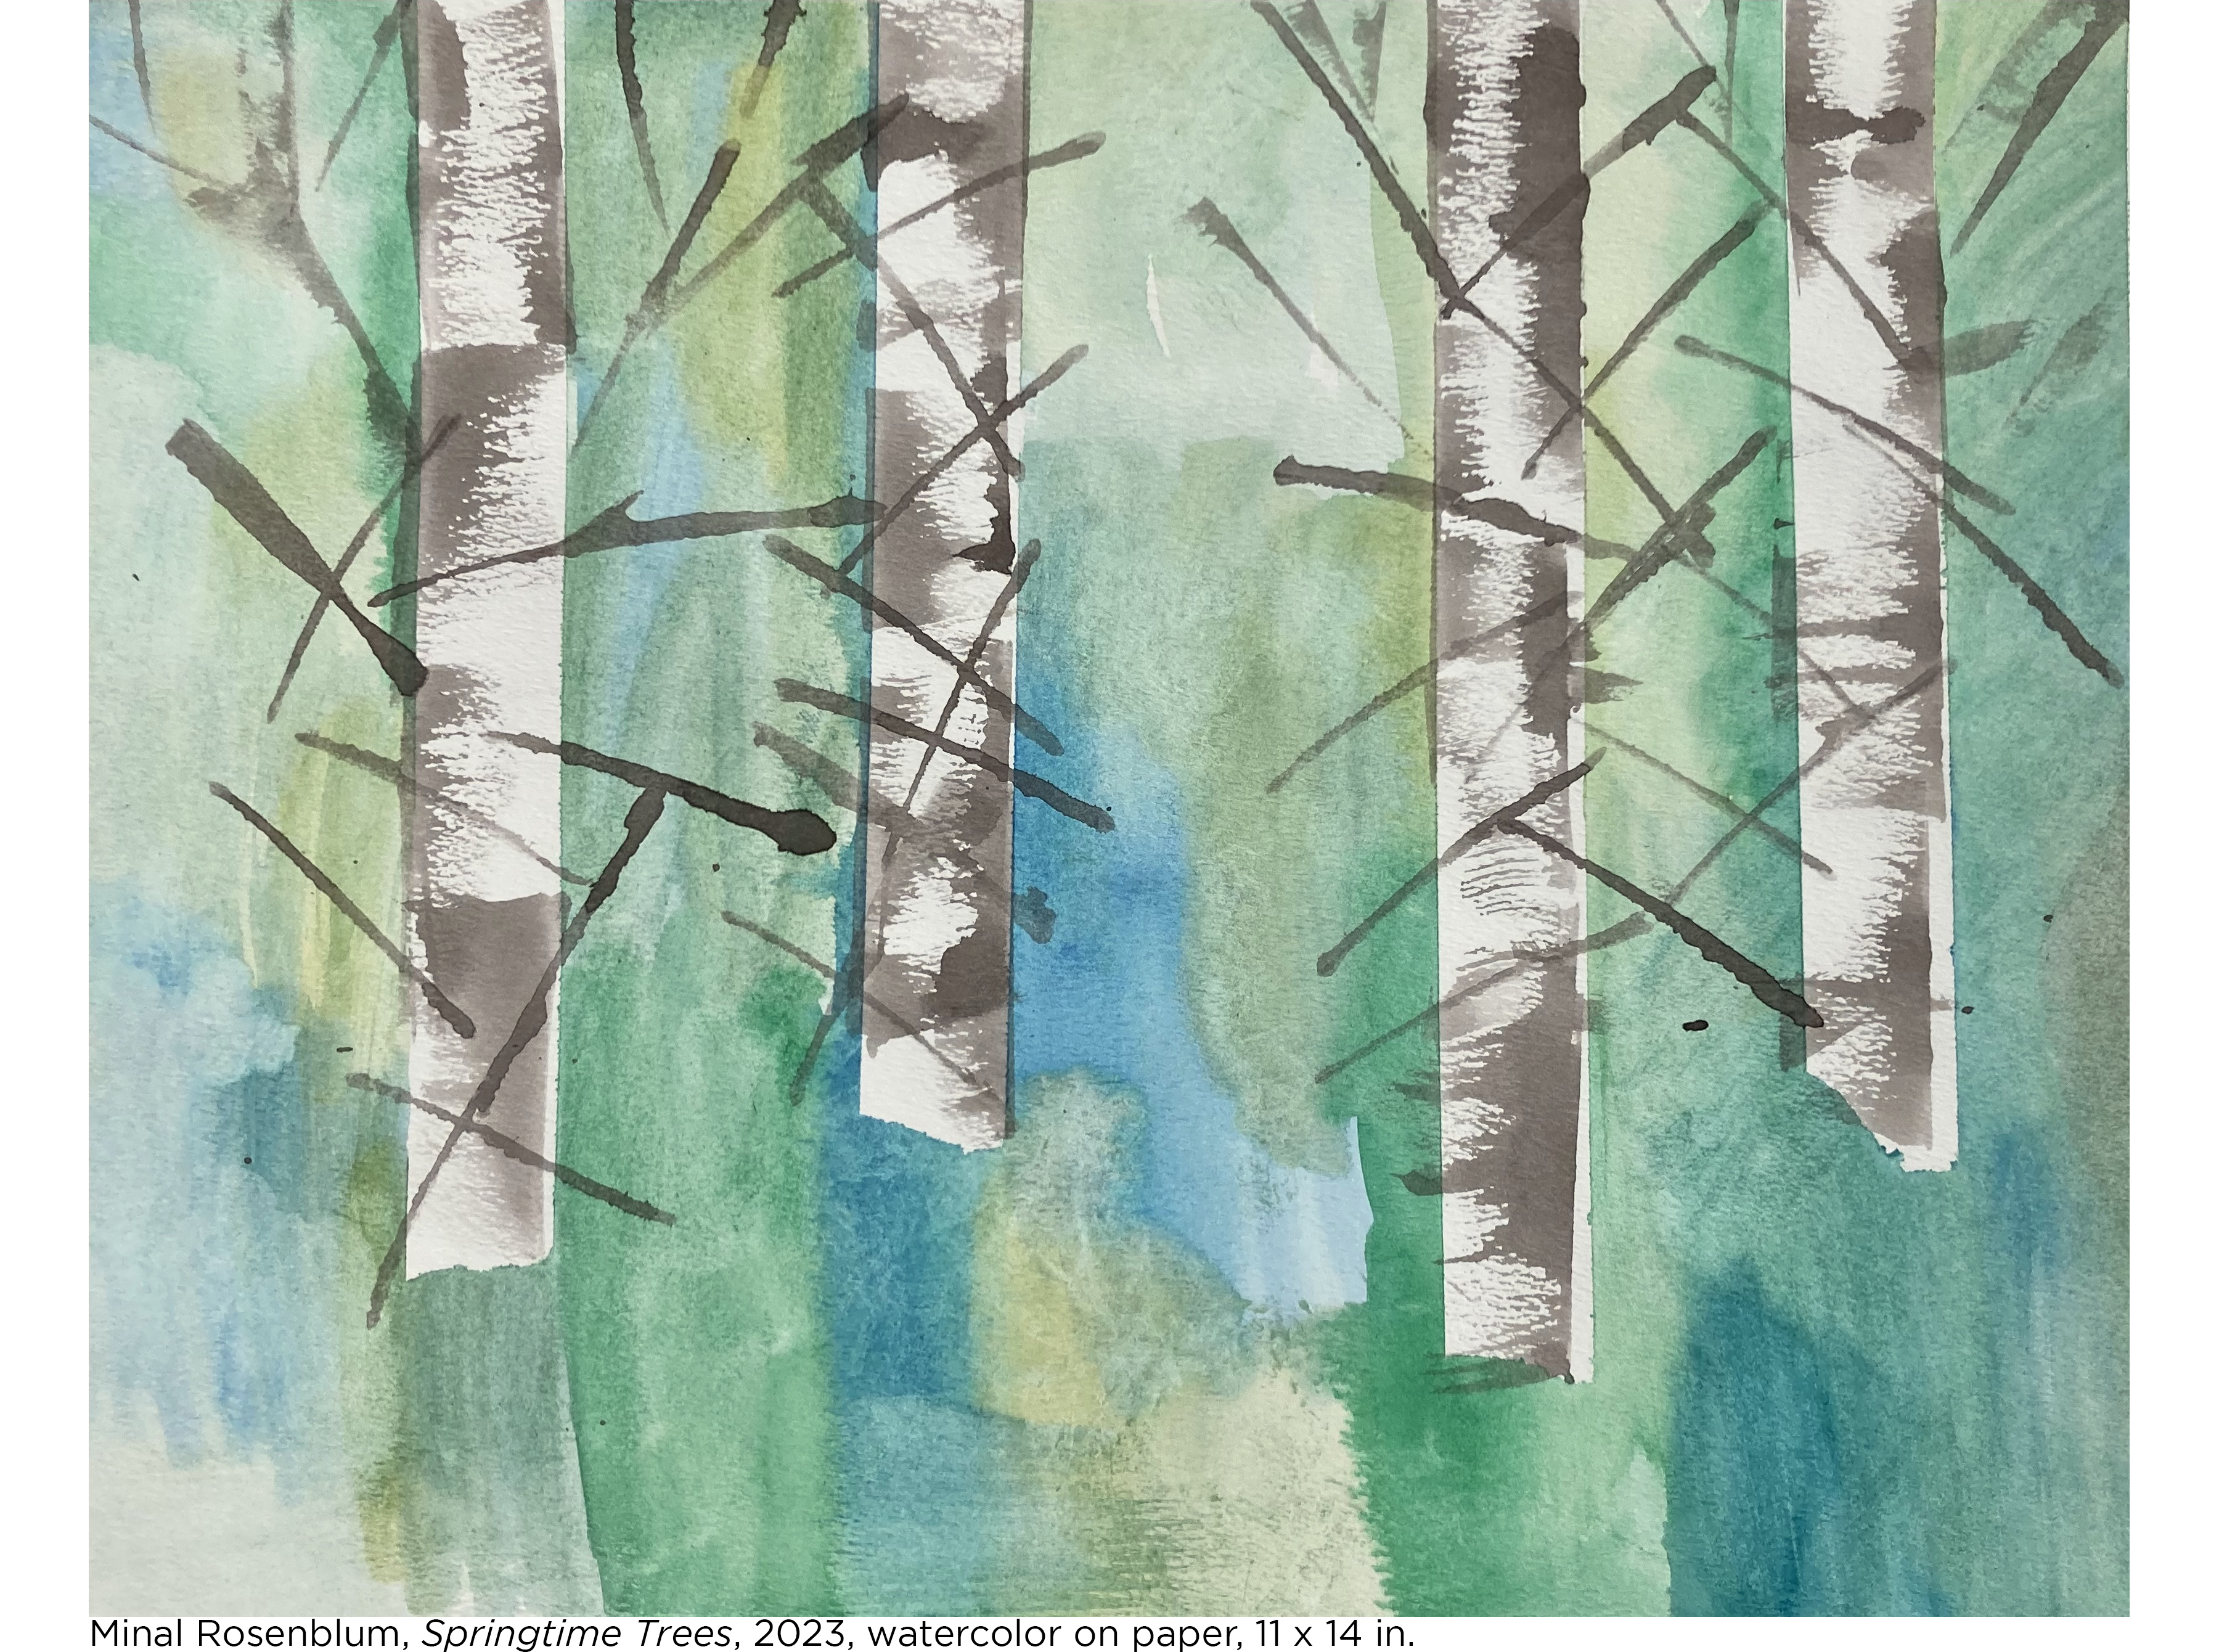 Water color work with blue and green abstract background with four birch trees across the length of the work. Artist: Minal Rosenblum. Title: "Springtime Trees."